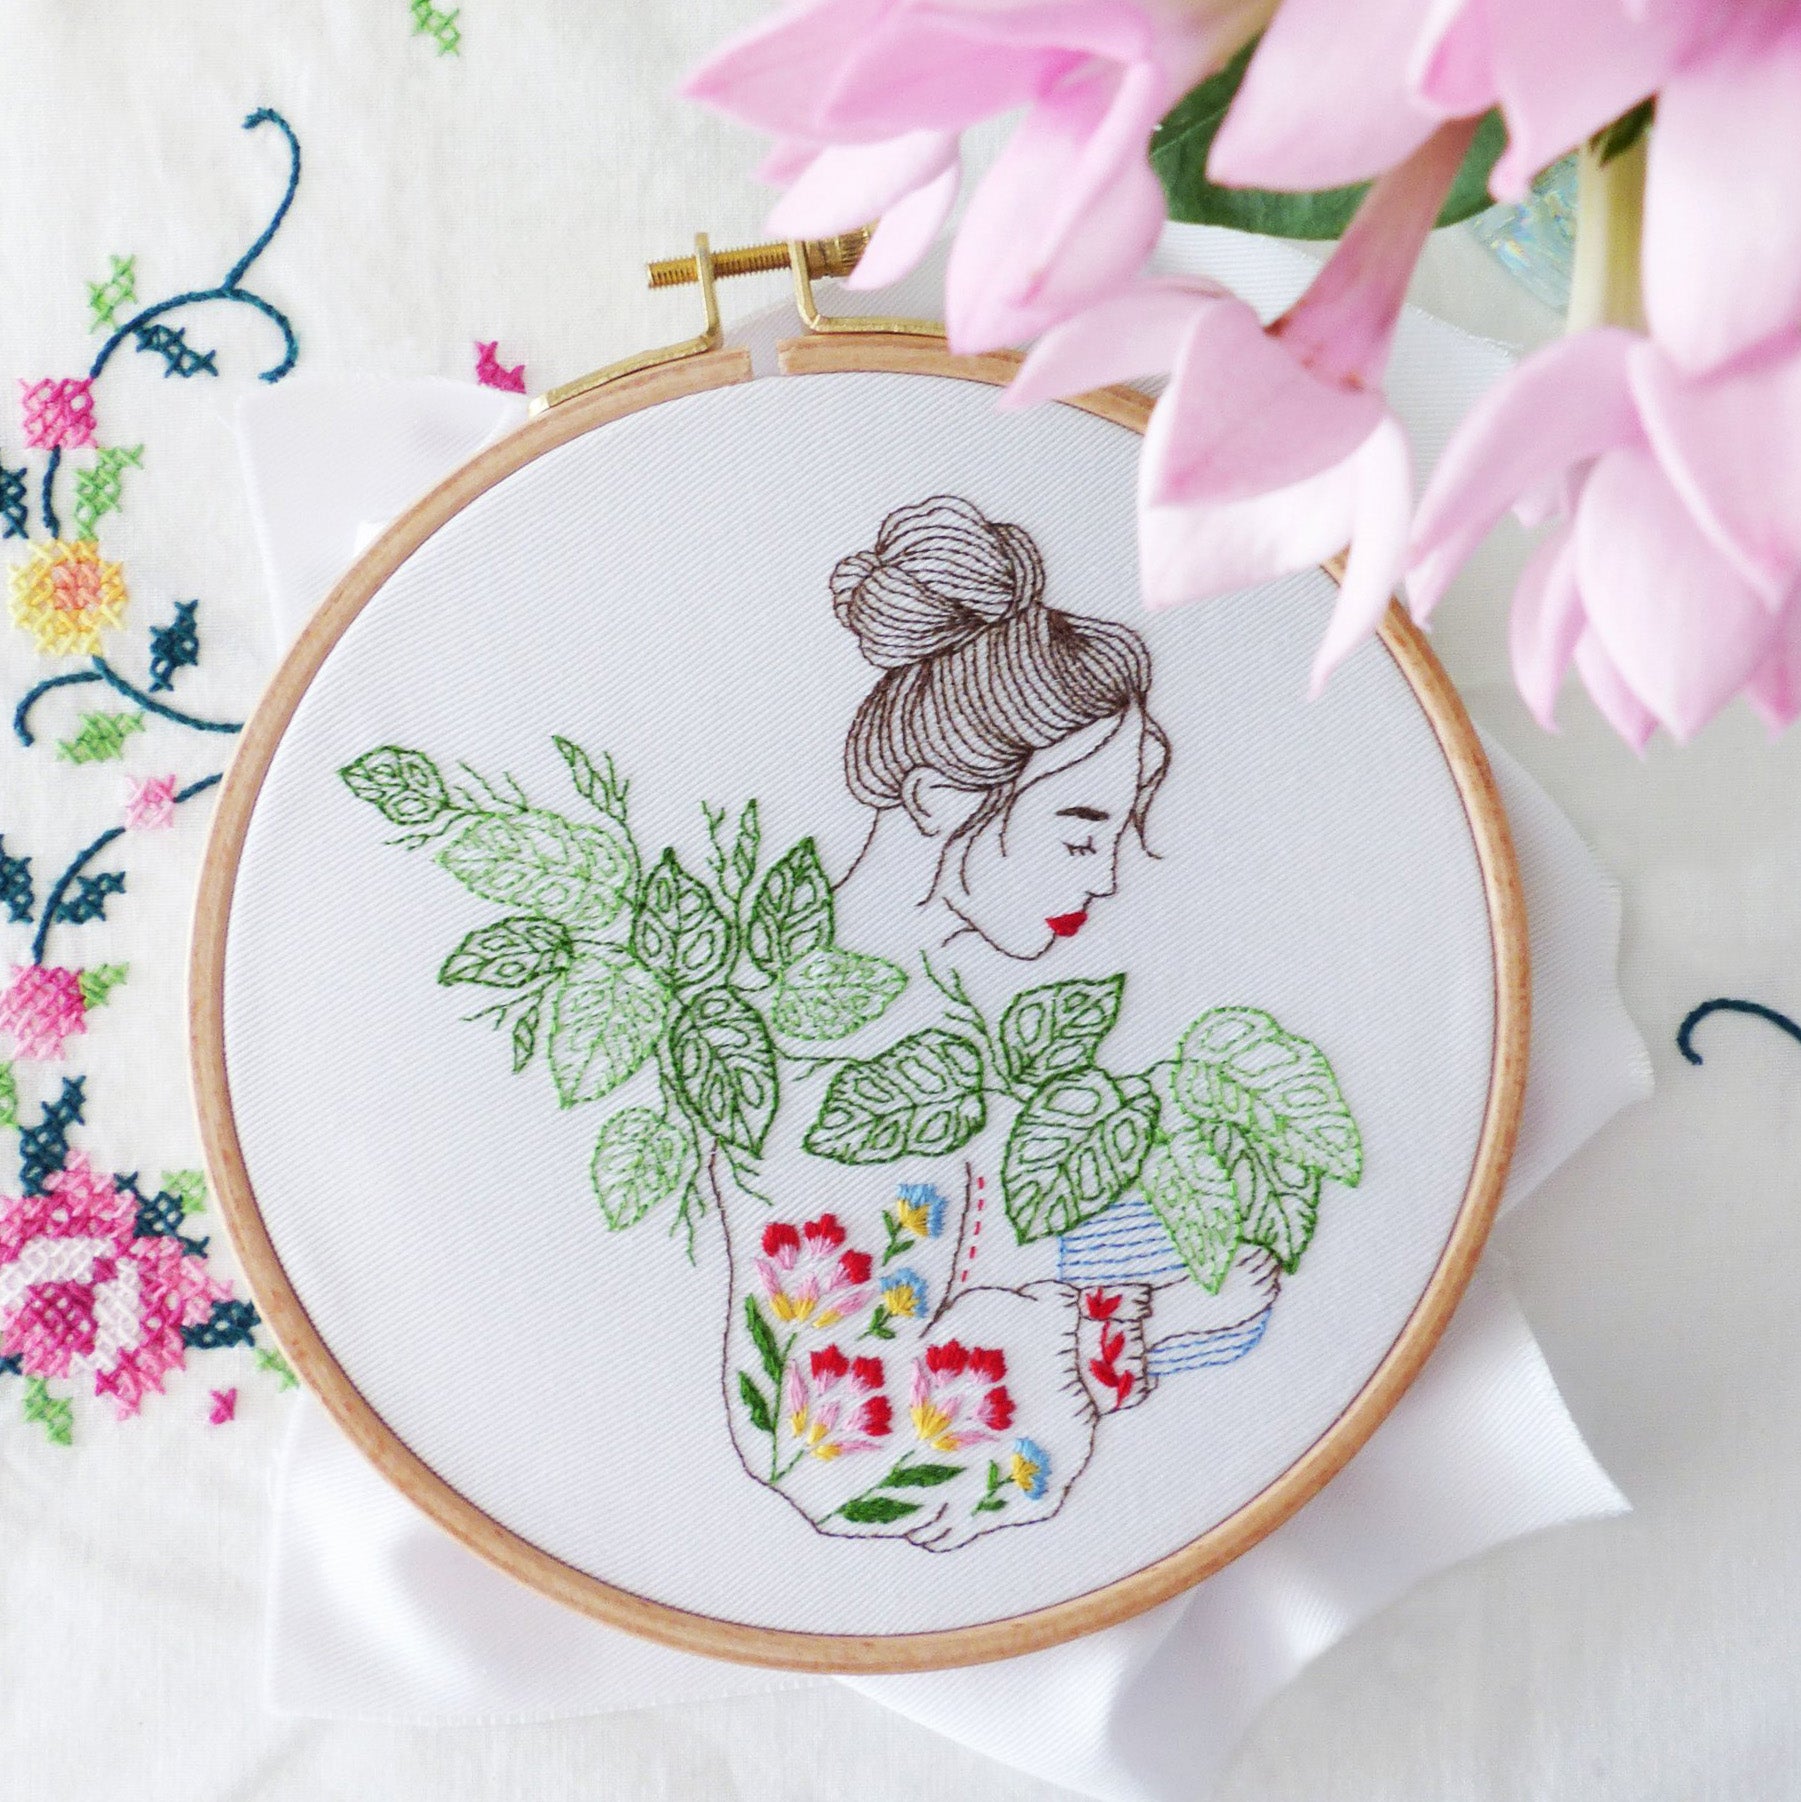 embroidery ideas